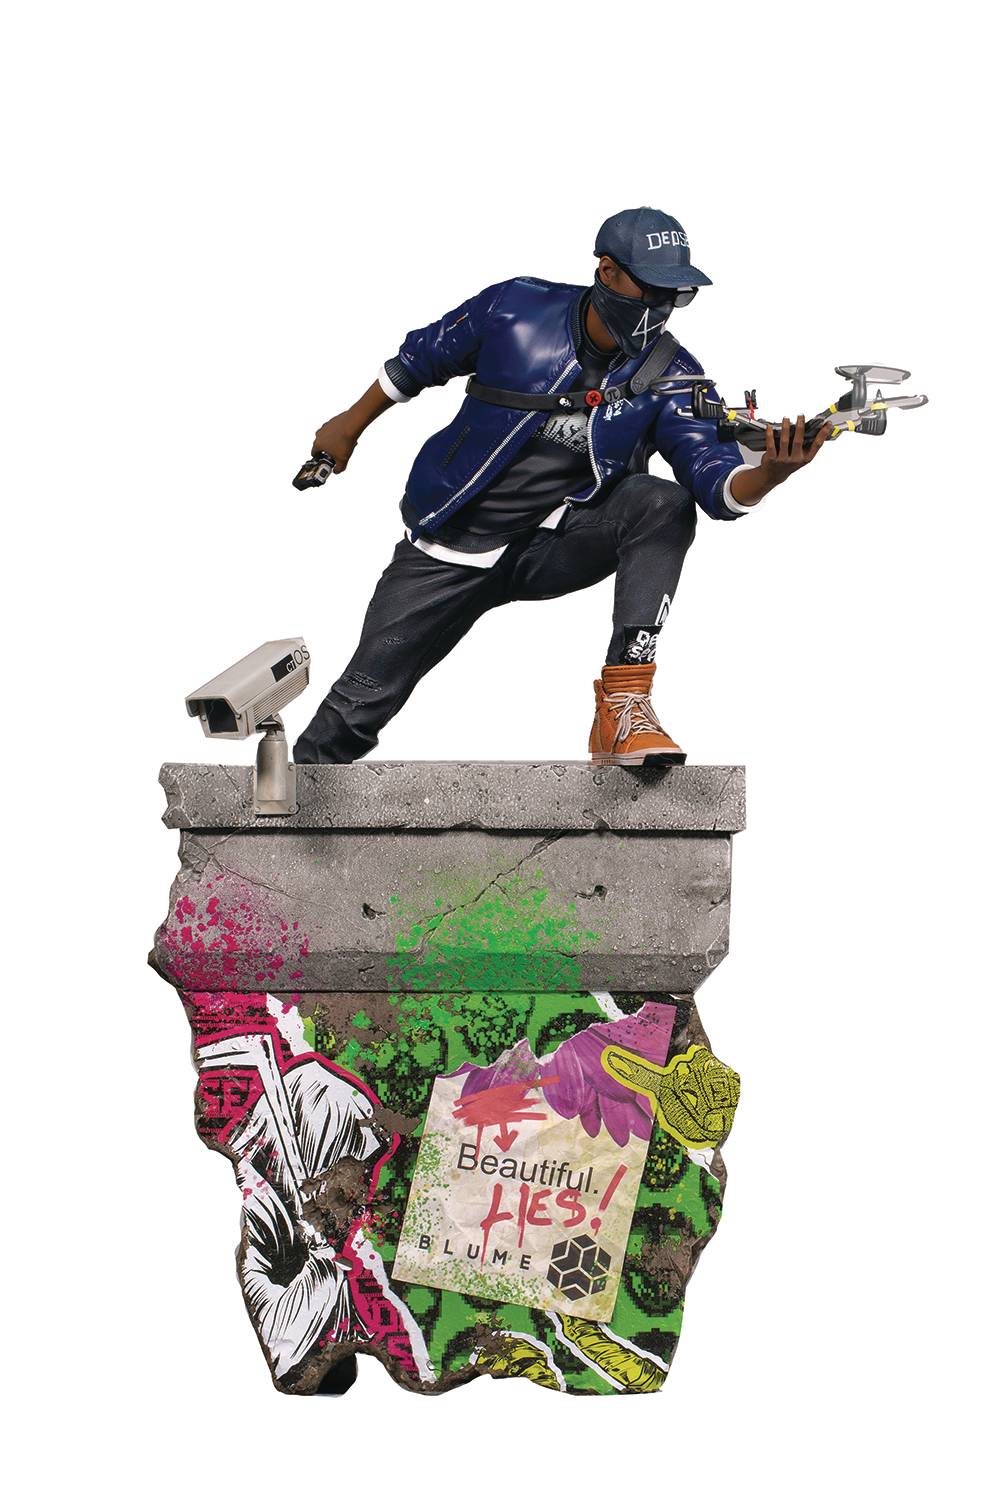 WATCH DOGS 2 MARCUS 1/4 SCALE STATUE